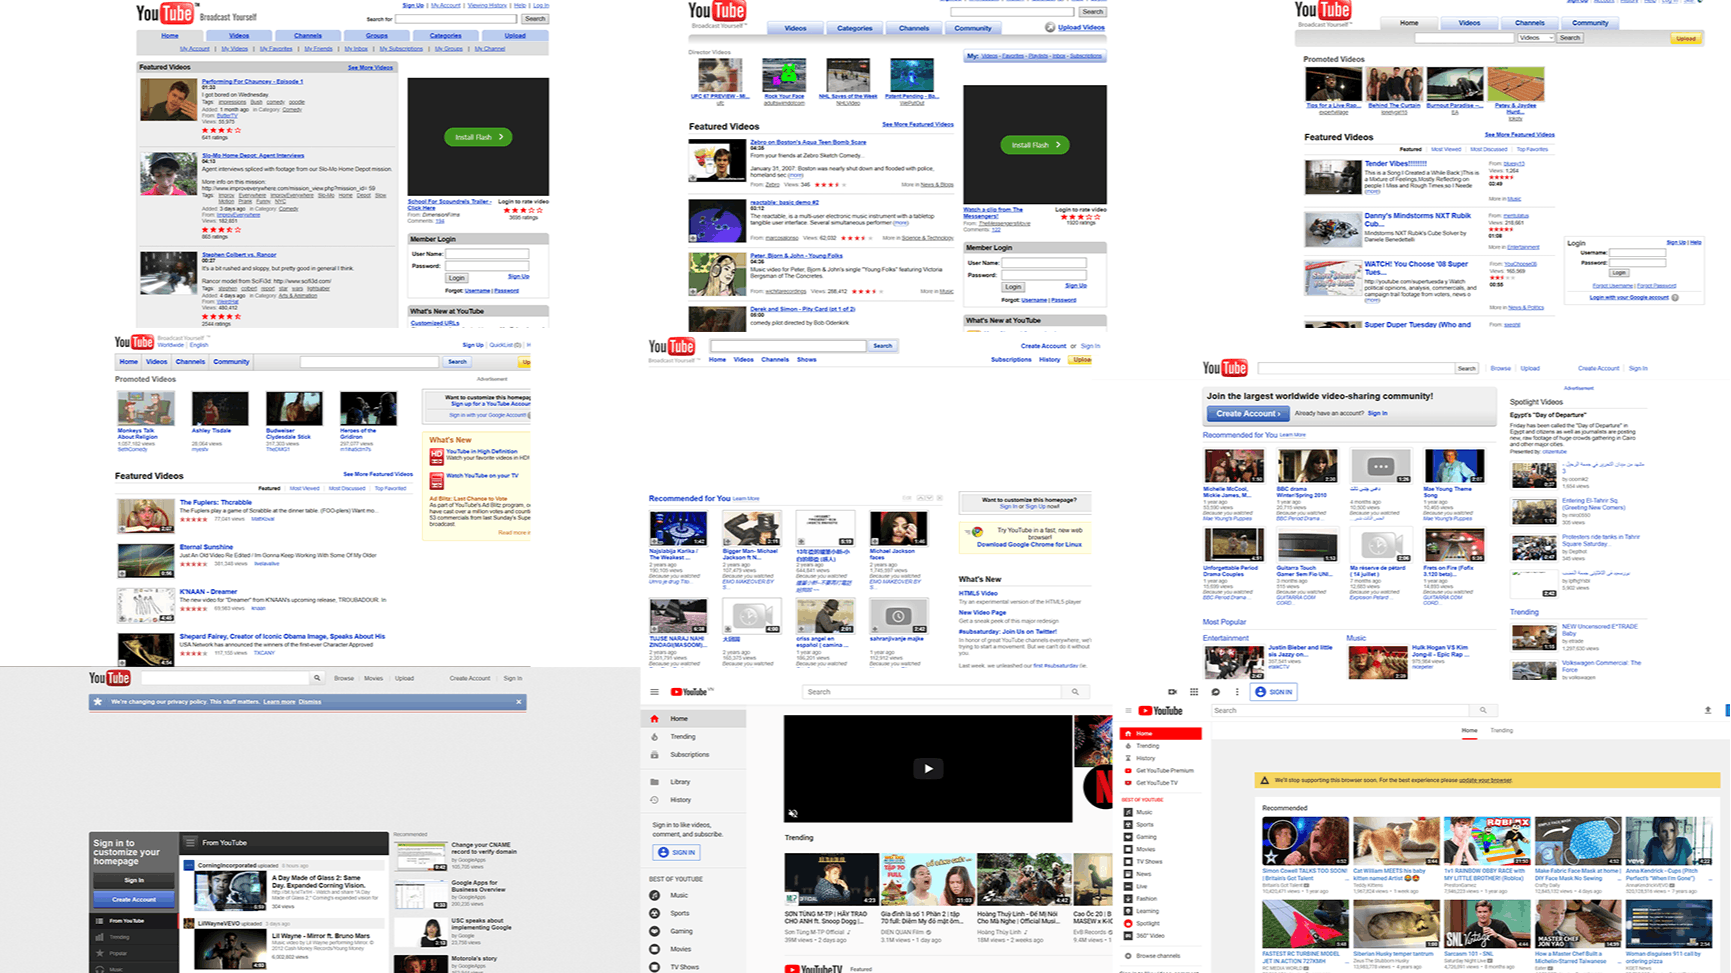 /how-the-youtube-homepage-has-changed-in-the-past-15-years-9cd346o feature image